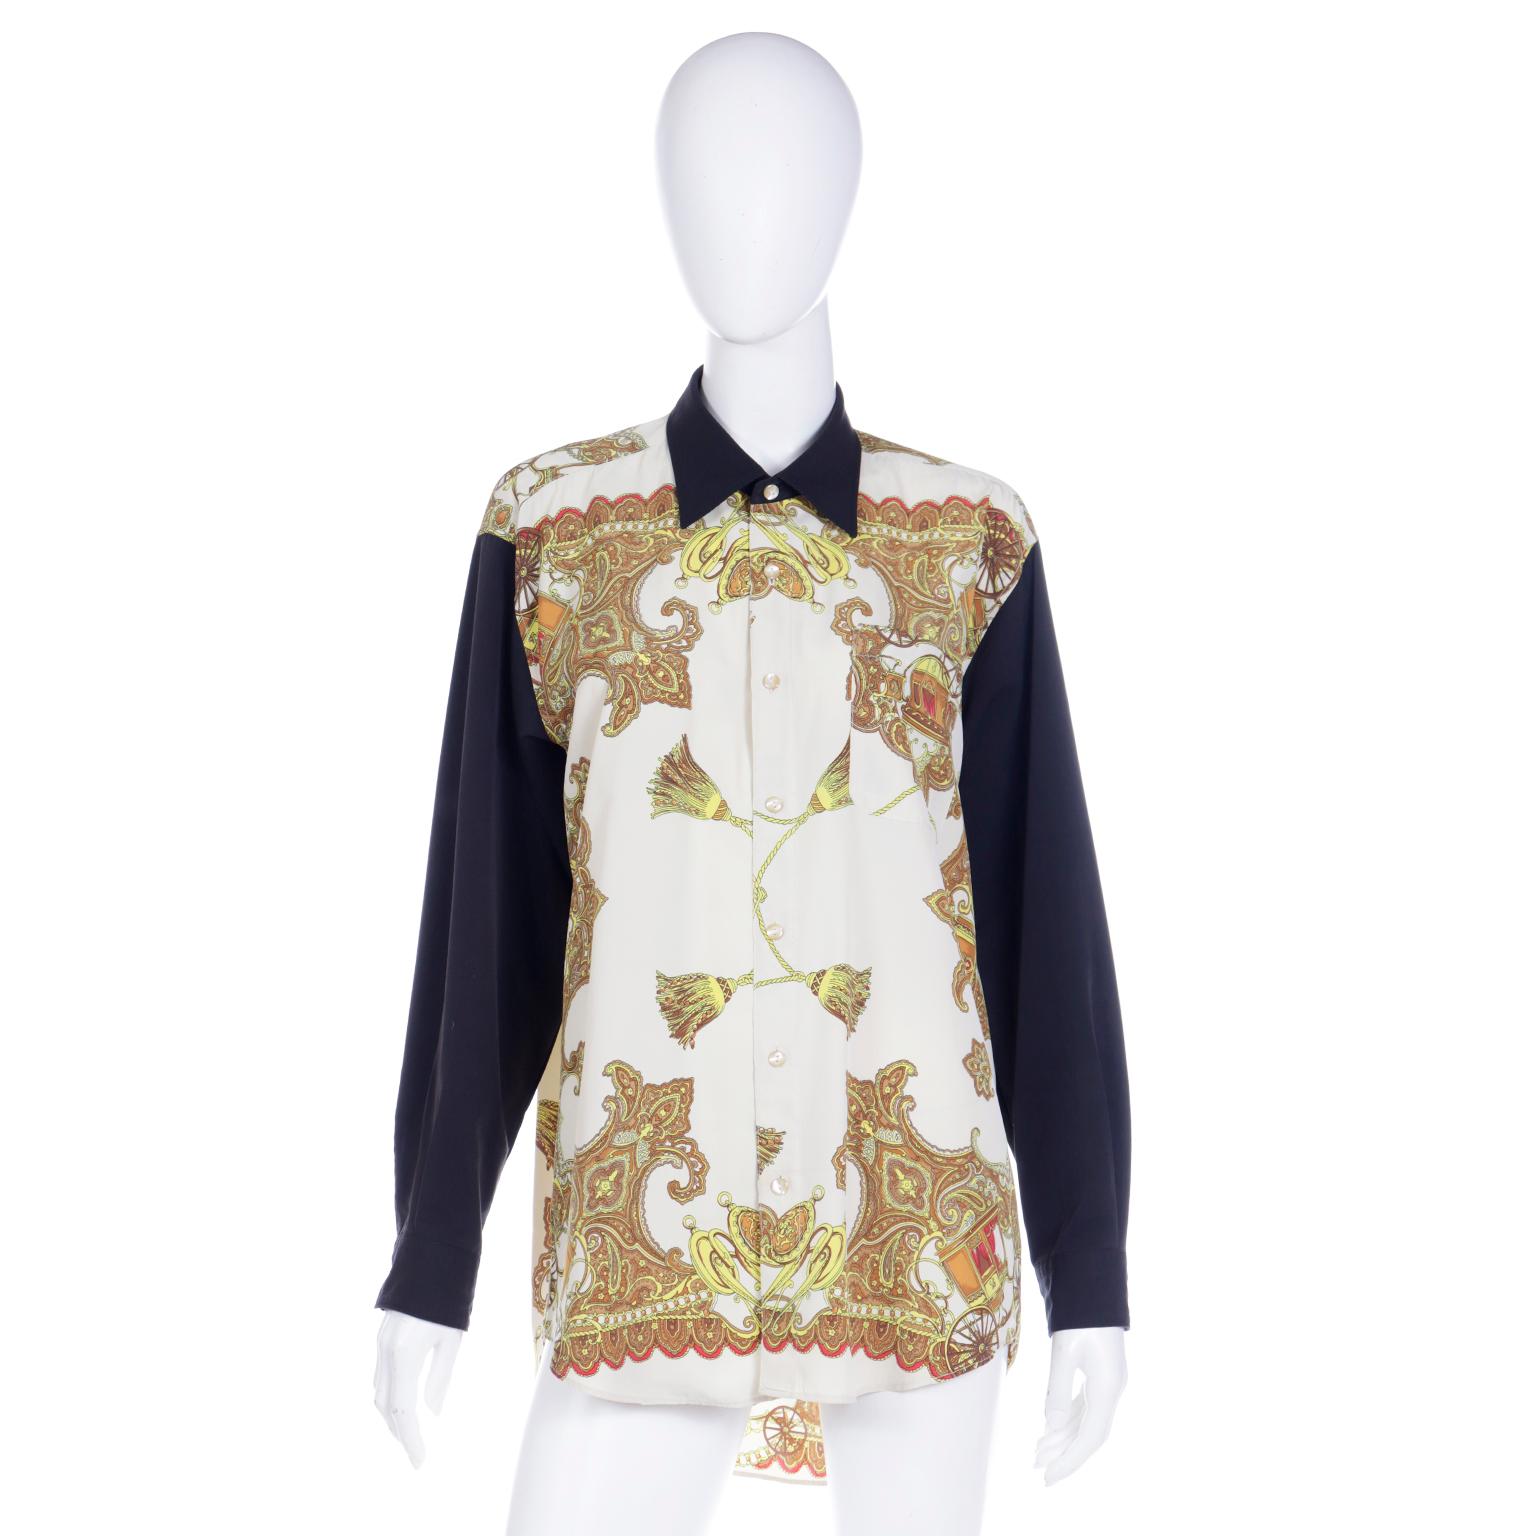 We love Emanuel Ungaro and we instantly loved this fabulous baroque print shirt! This silky button front shirt was made for a man but can easily be worn oversized by a woman, and it was a woman who originally owned this one! The torso and shoulders